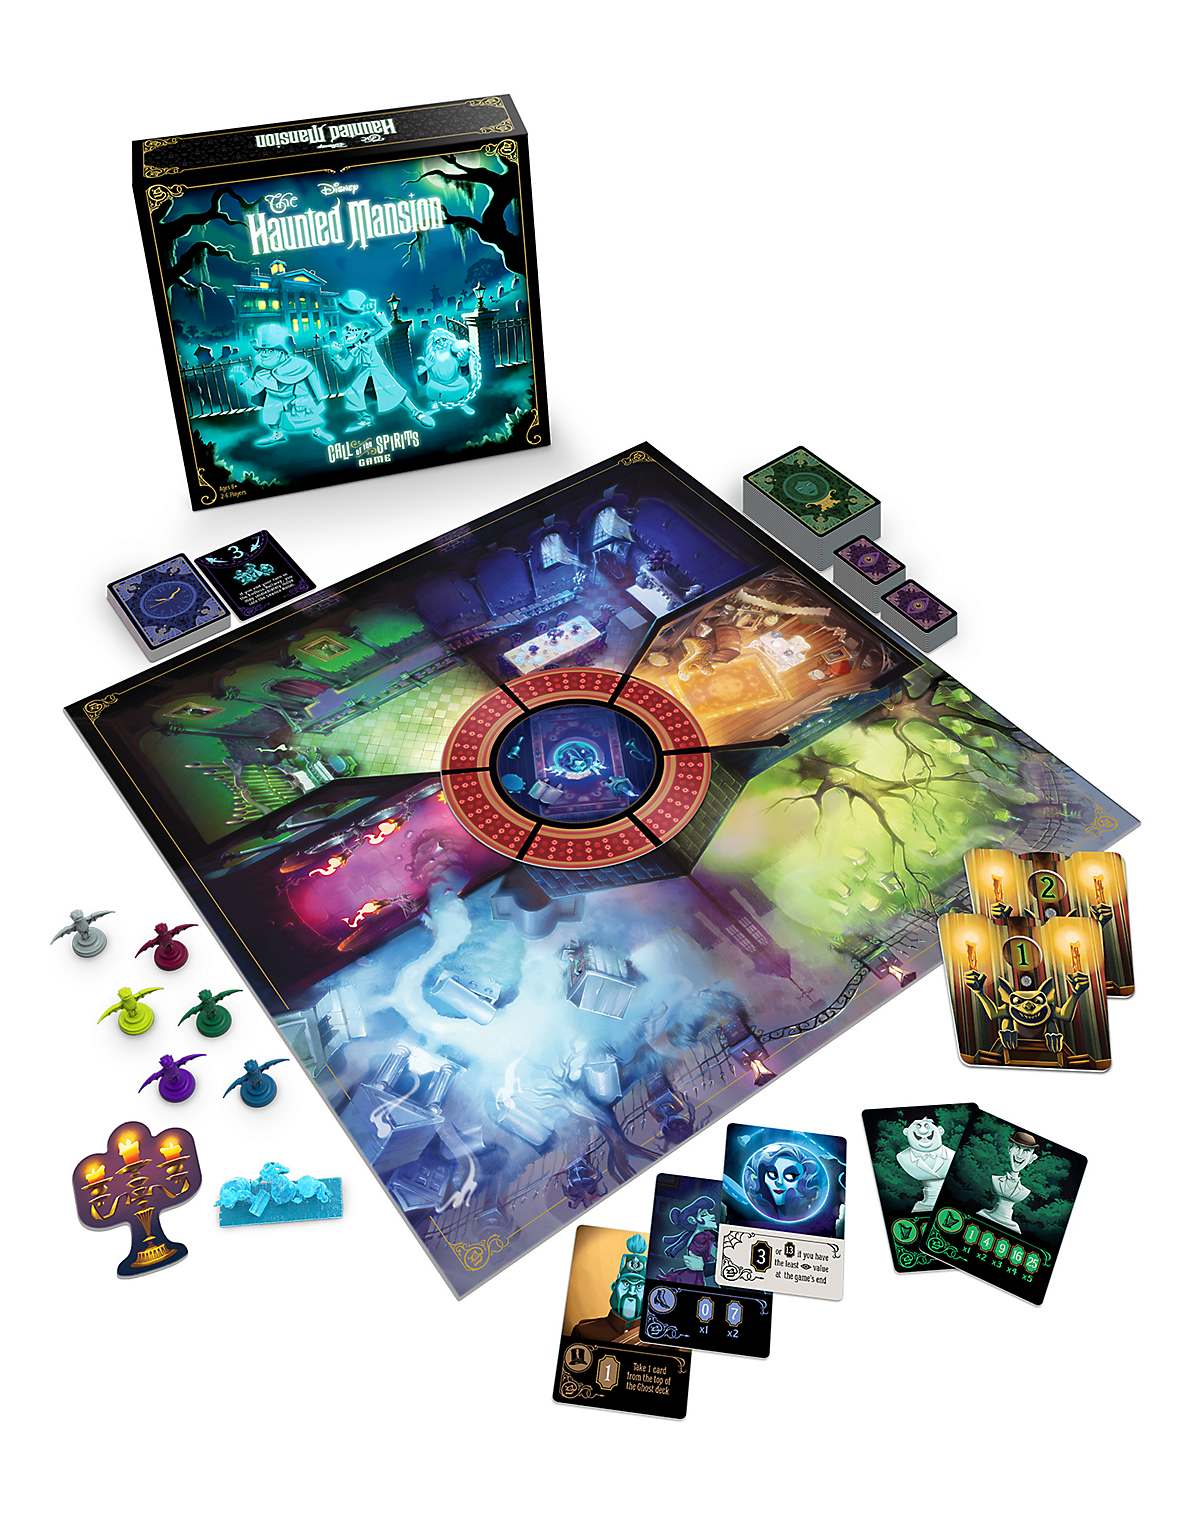 The Haunted Mansion Call of the Spirits Board Game - Disney